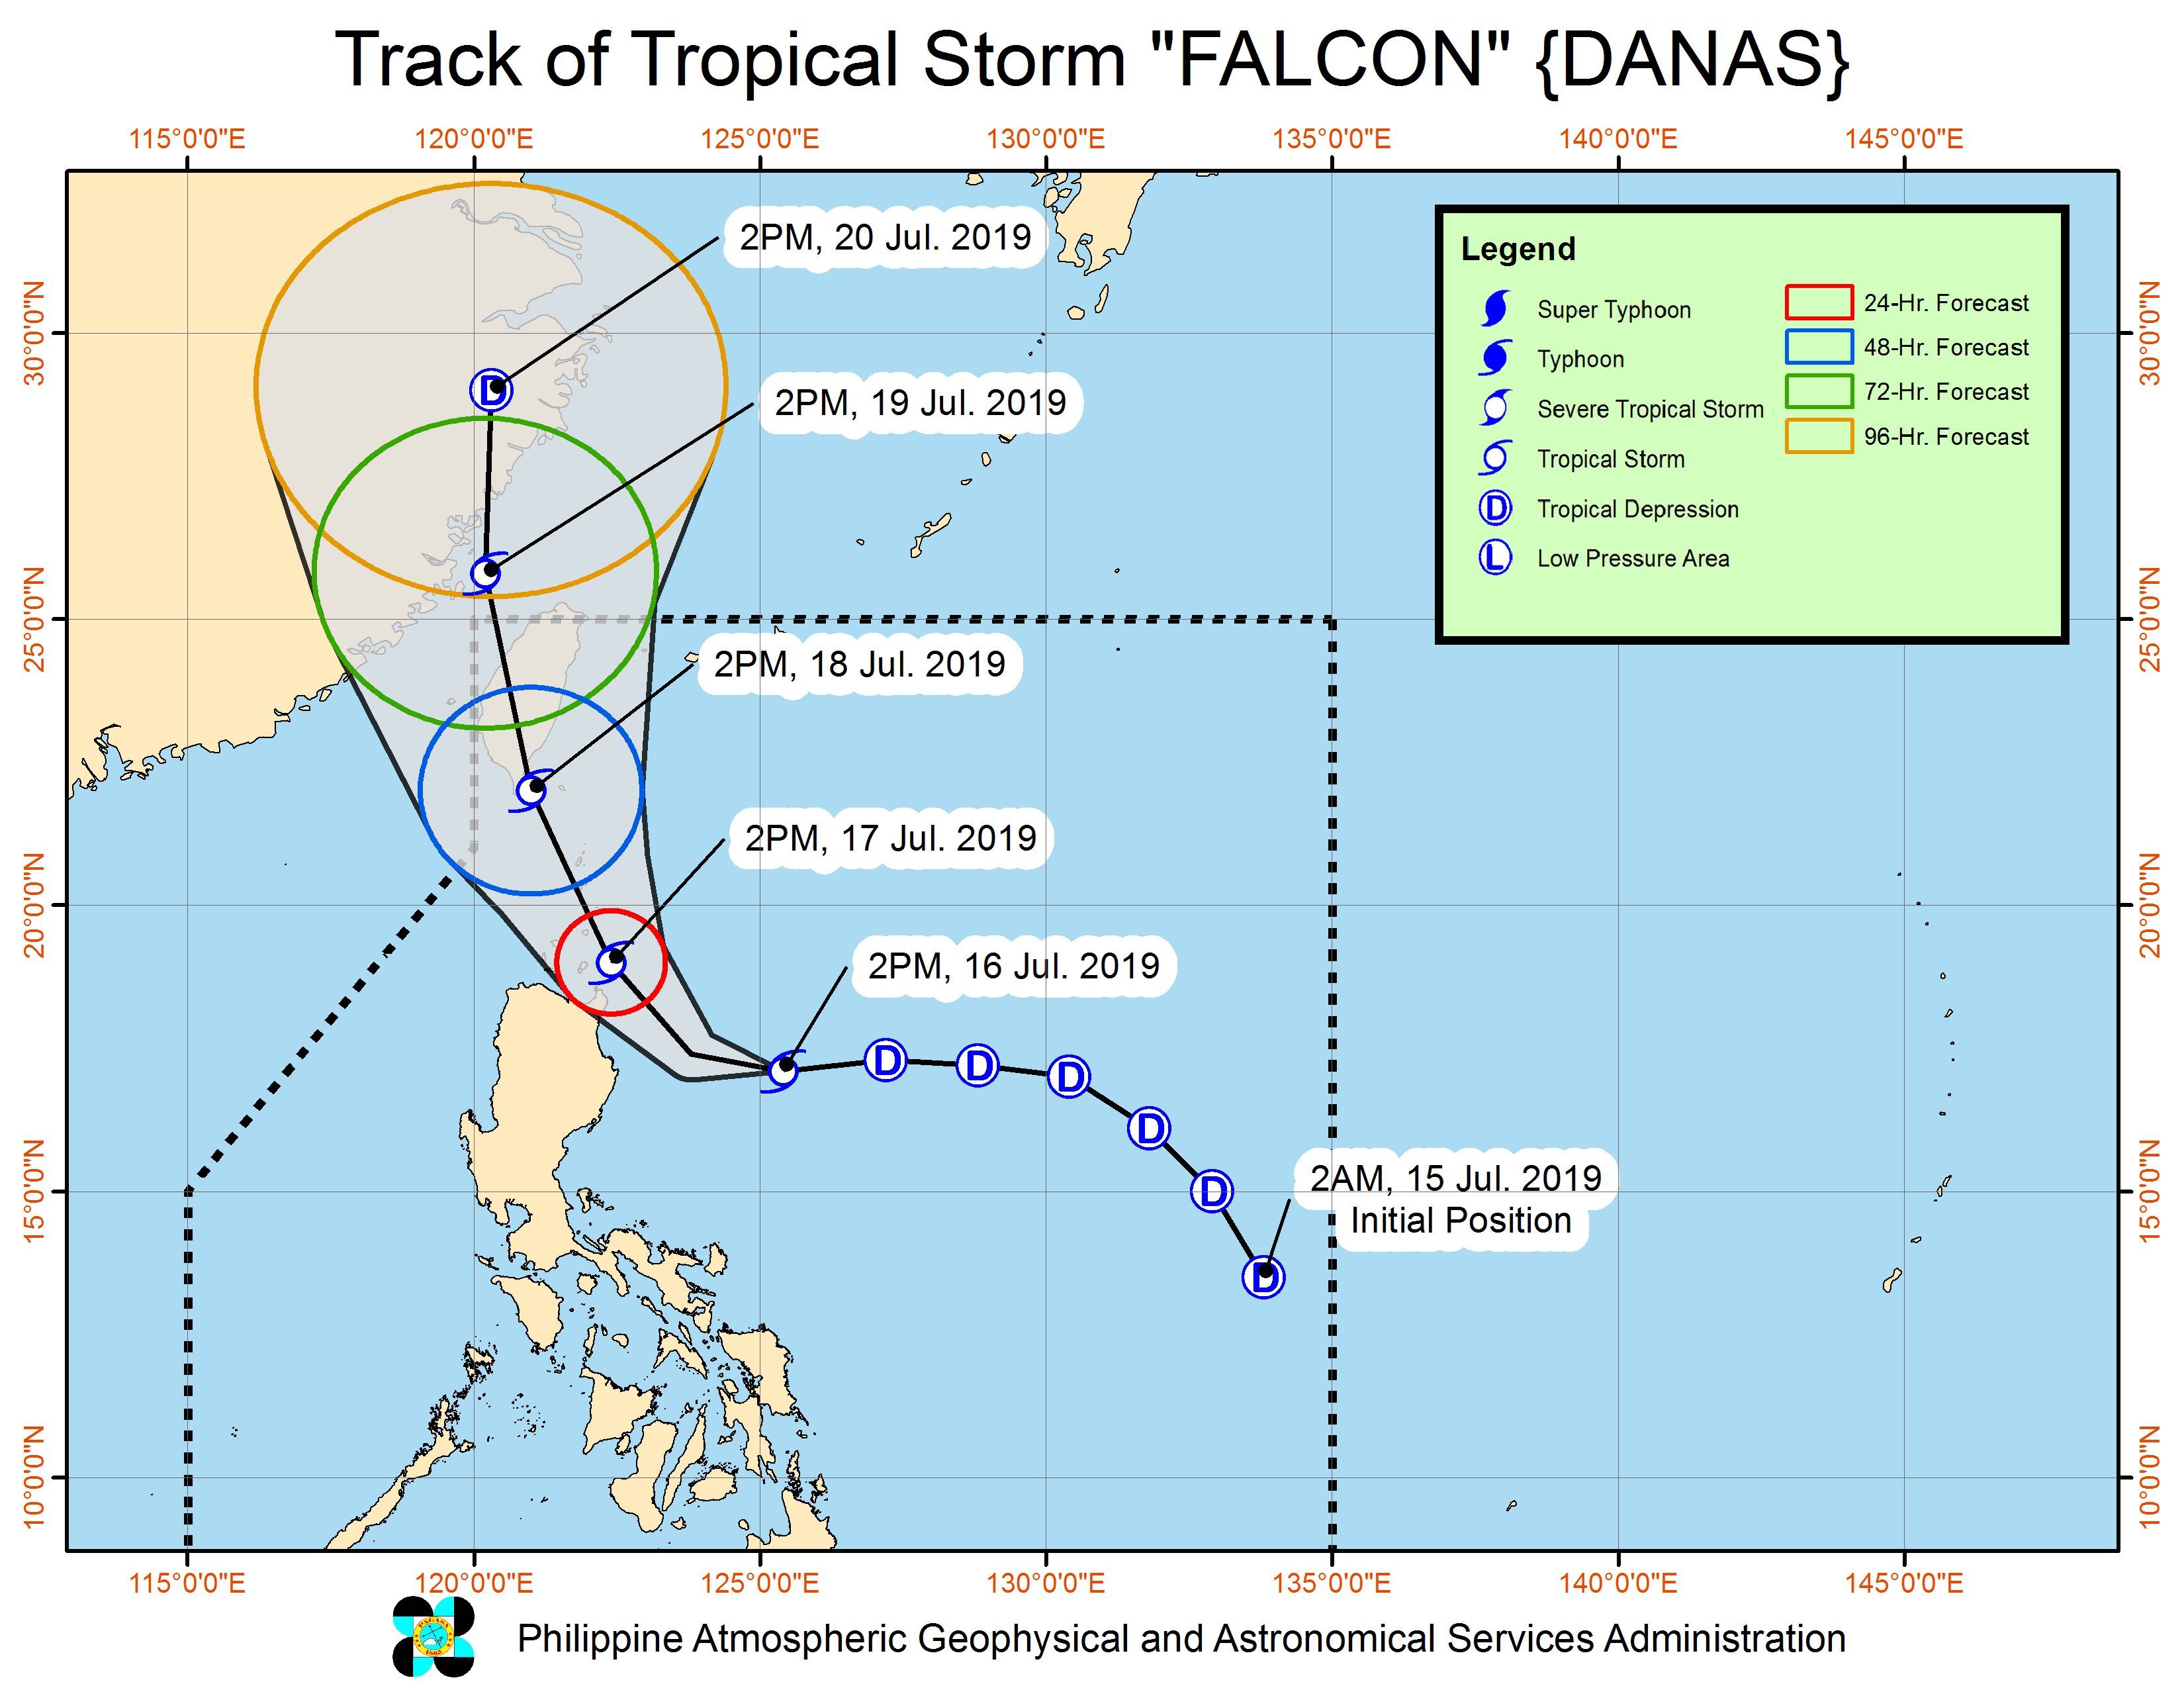 Forecast track of Tropical Storm Falcon (Danas) as of July 16, 2019, 5 pm. Image from PAGASA 